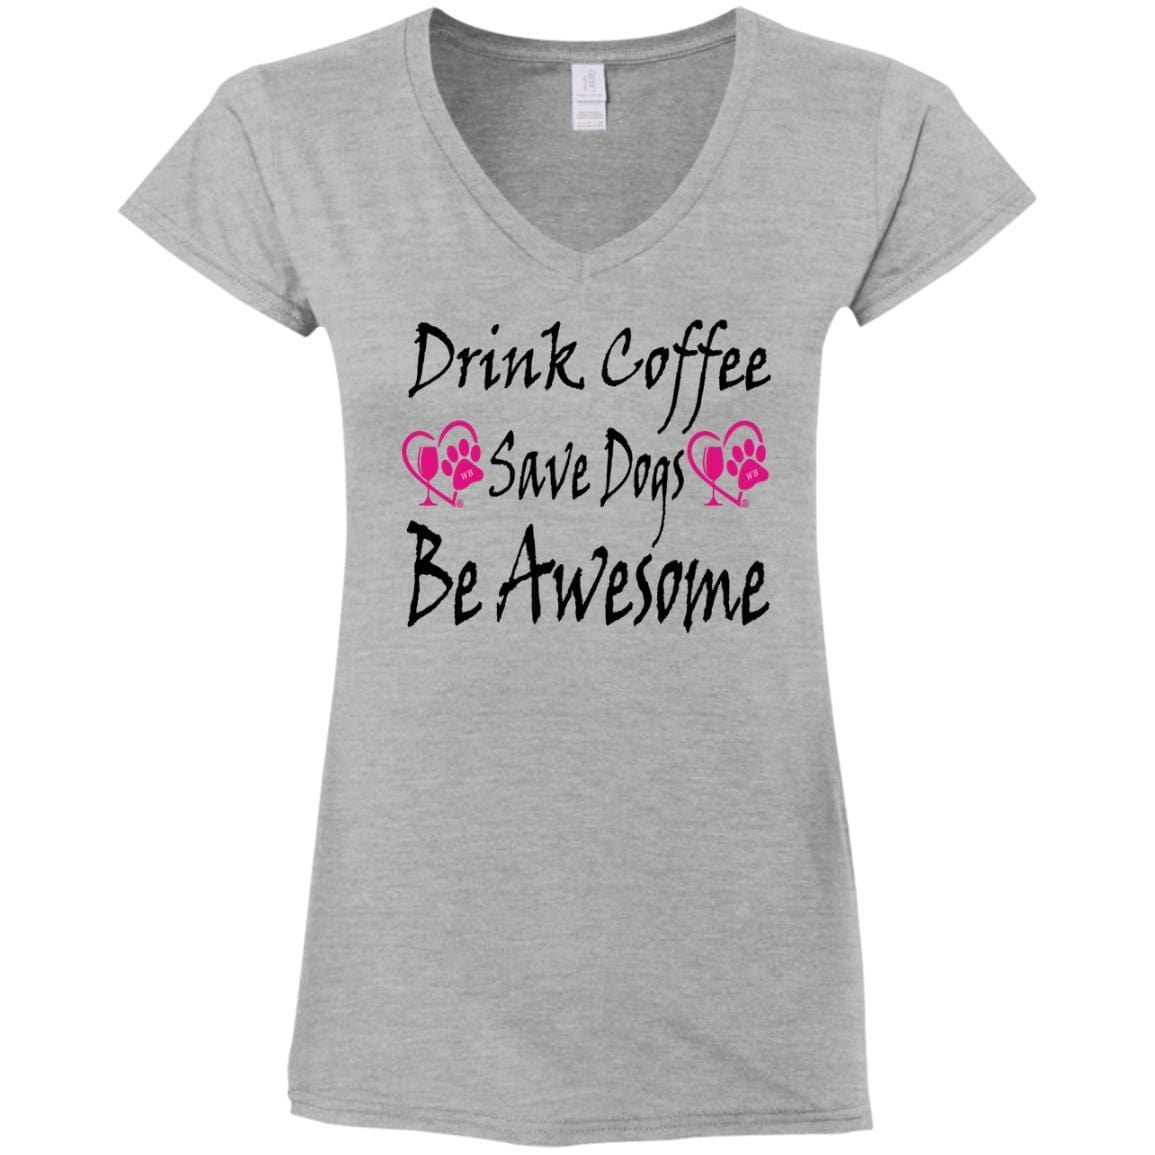 T-Shirts Sport Grey / S Winey Bitches Co "Drink Coffee Save Dogs Be Awesome" Ladies' Fitted Softstyle 4.5 oz V-Neck T-Shirt WineyBitchesCo